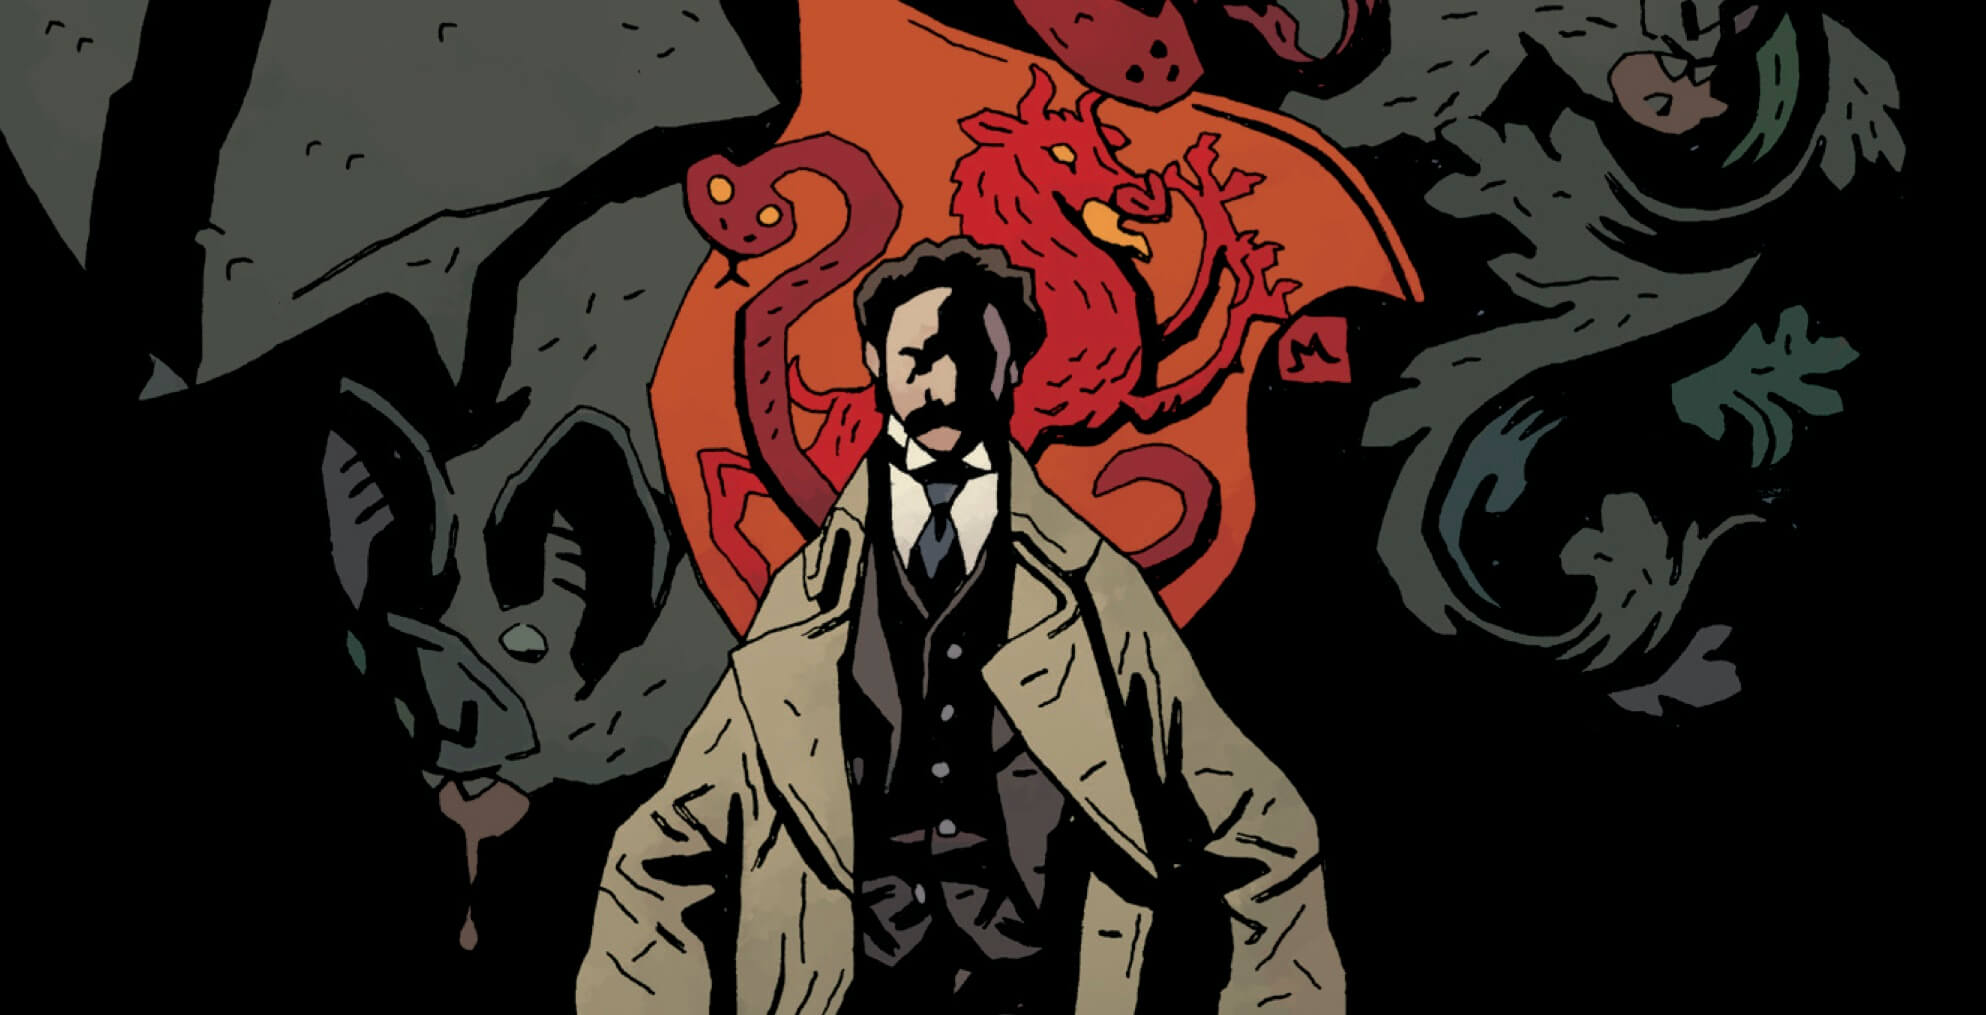 A mustached man in a trench coat holds a wooden stake and a rosary. A crest of a snake and a dragon is behind him